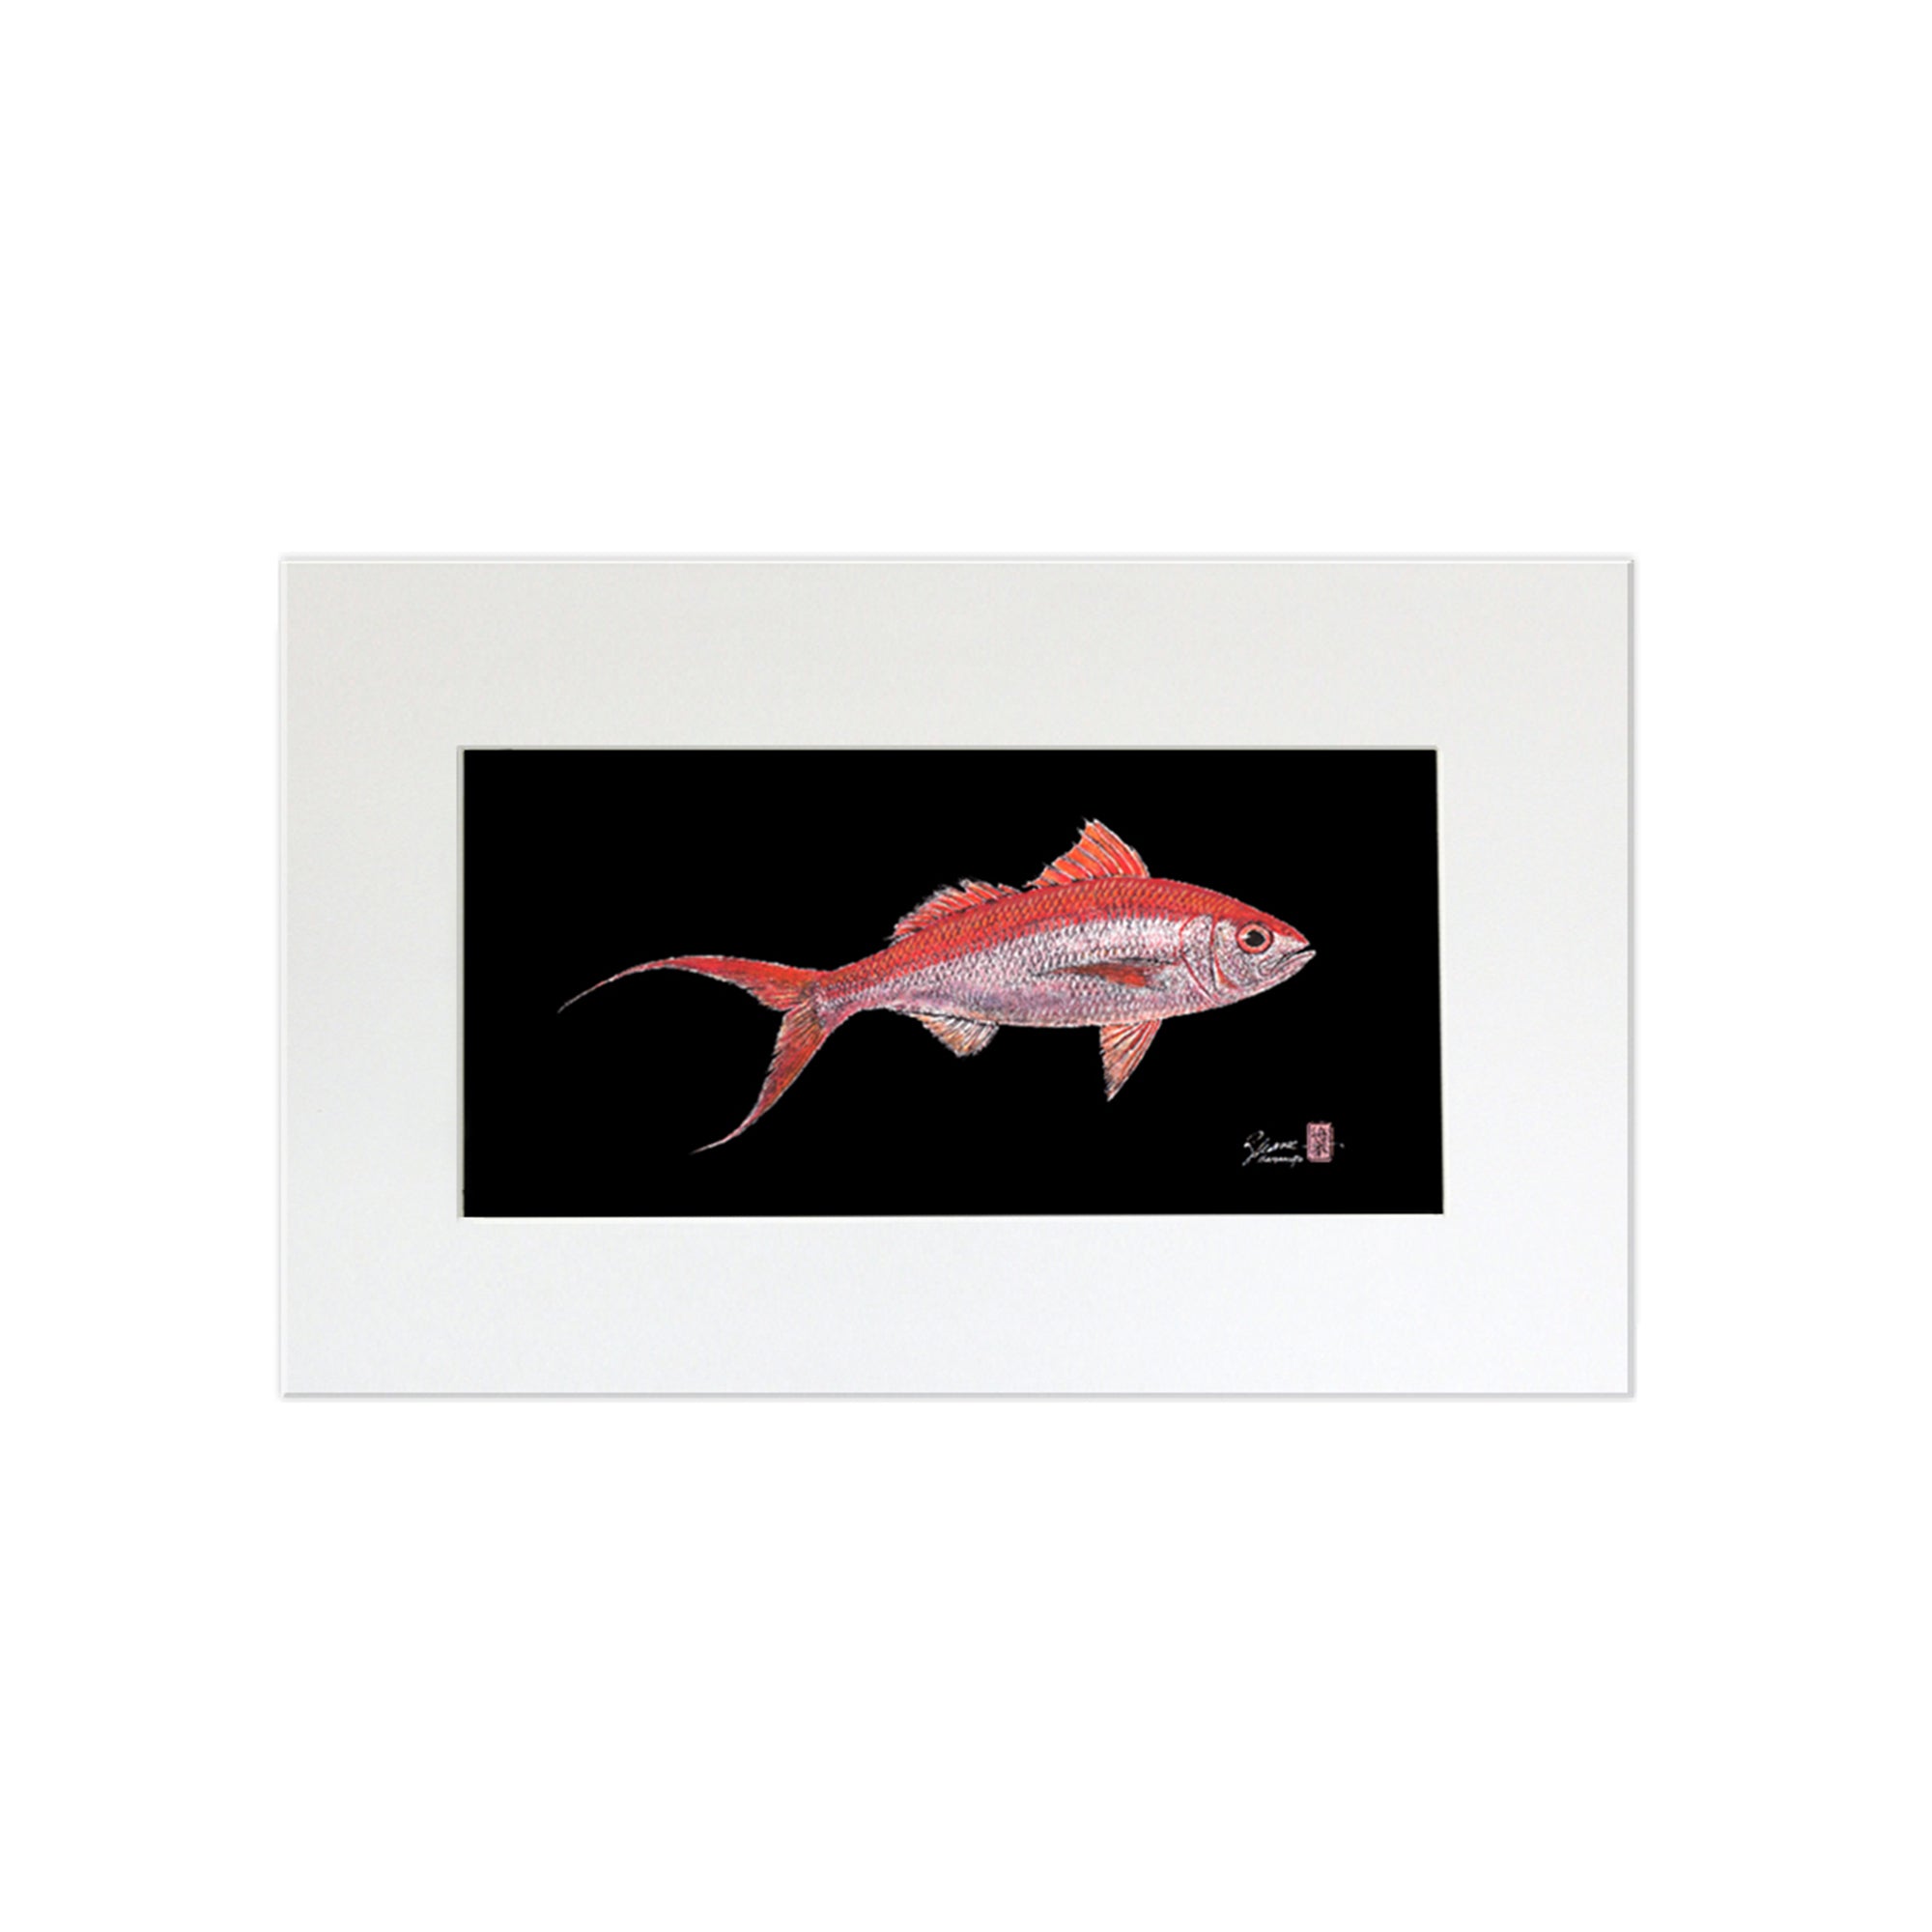 A matted print of Onaga (also known as Ruby Snapper or Scarlet Snapper) by Hawaii gyotaku artist Shane Hamamoto